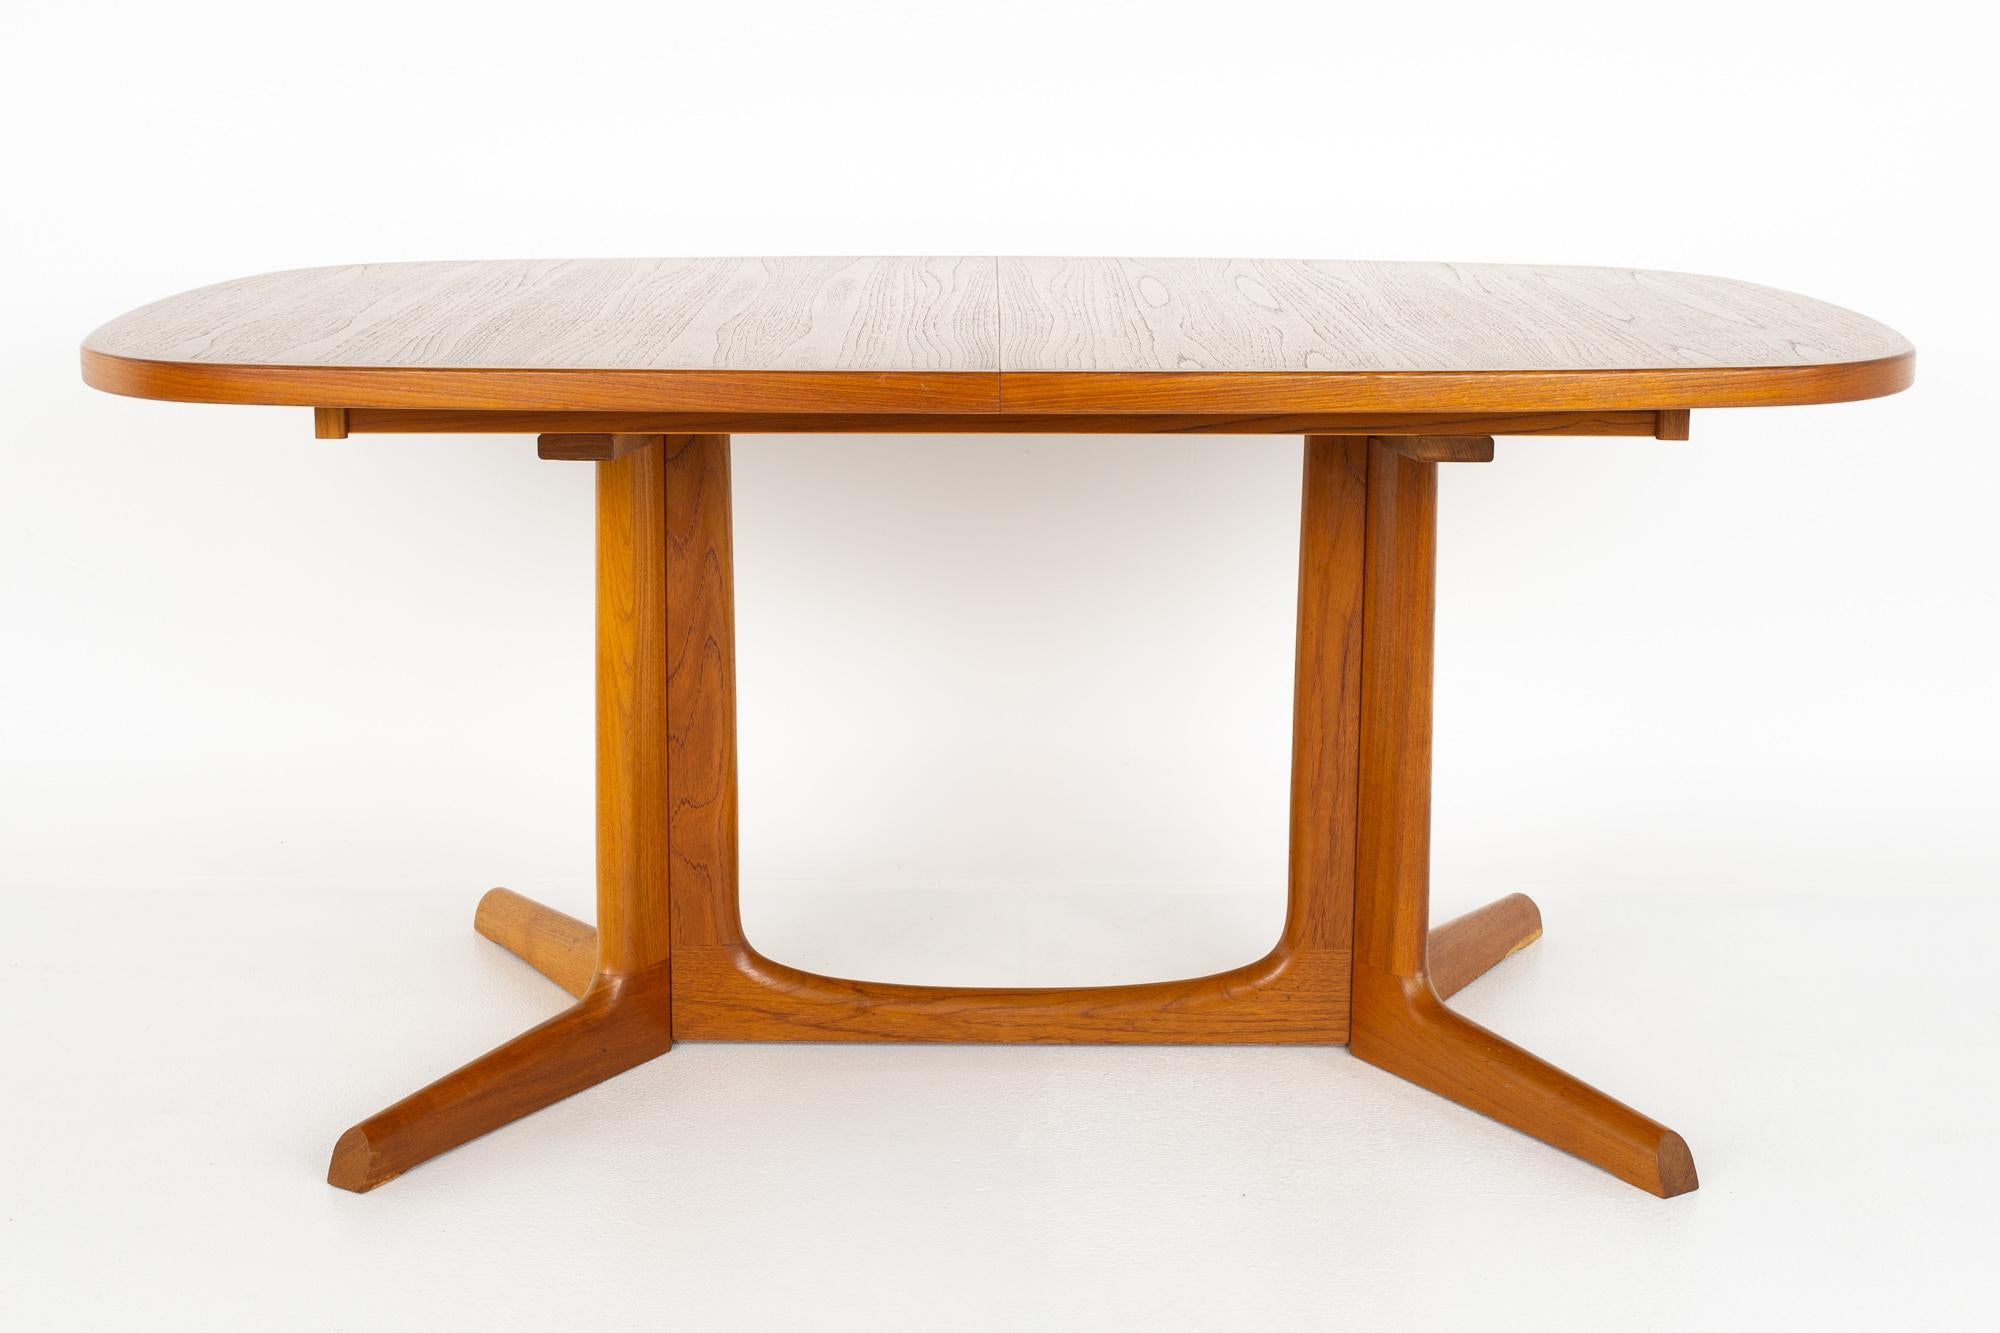 Gudme Mobelfabrik Danish mid century teak dining table with 2 leaves

Table measures: 64 wide x 41.5 deep x 28.5 inches high, with a chair clearance of 25.5 inches; each leaf is 19 inches wide, making a maximum table width of 102 inches when both